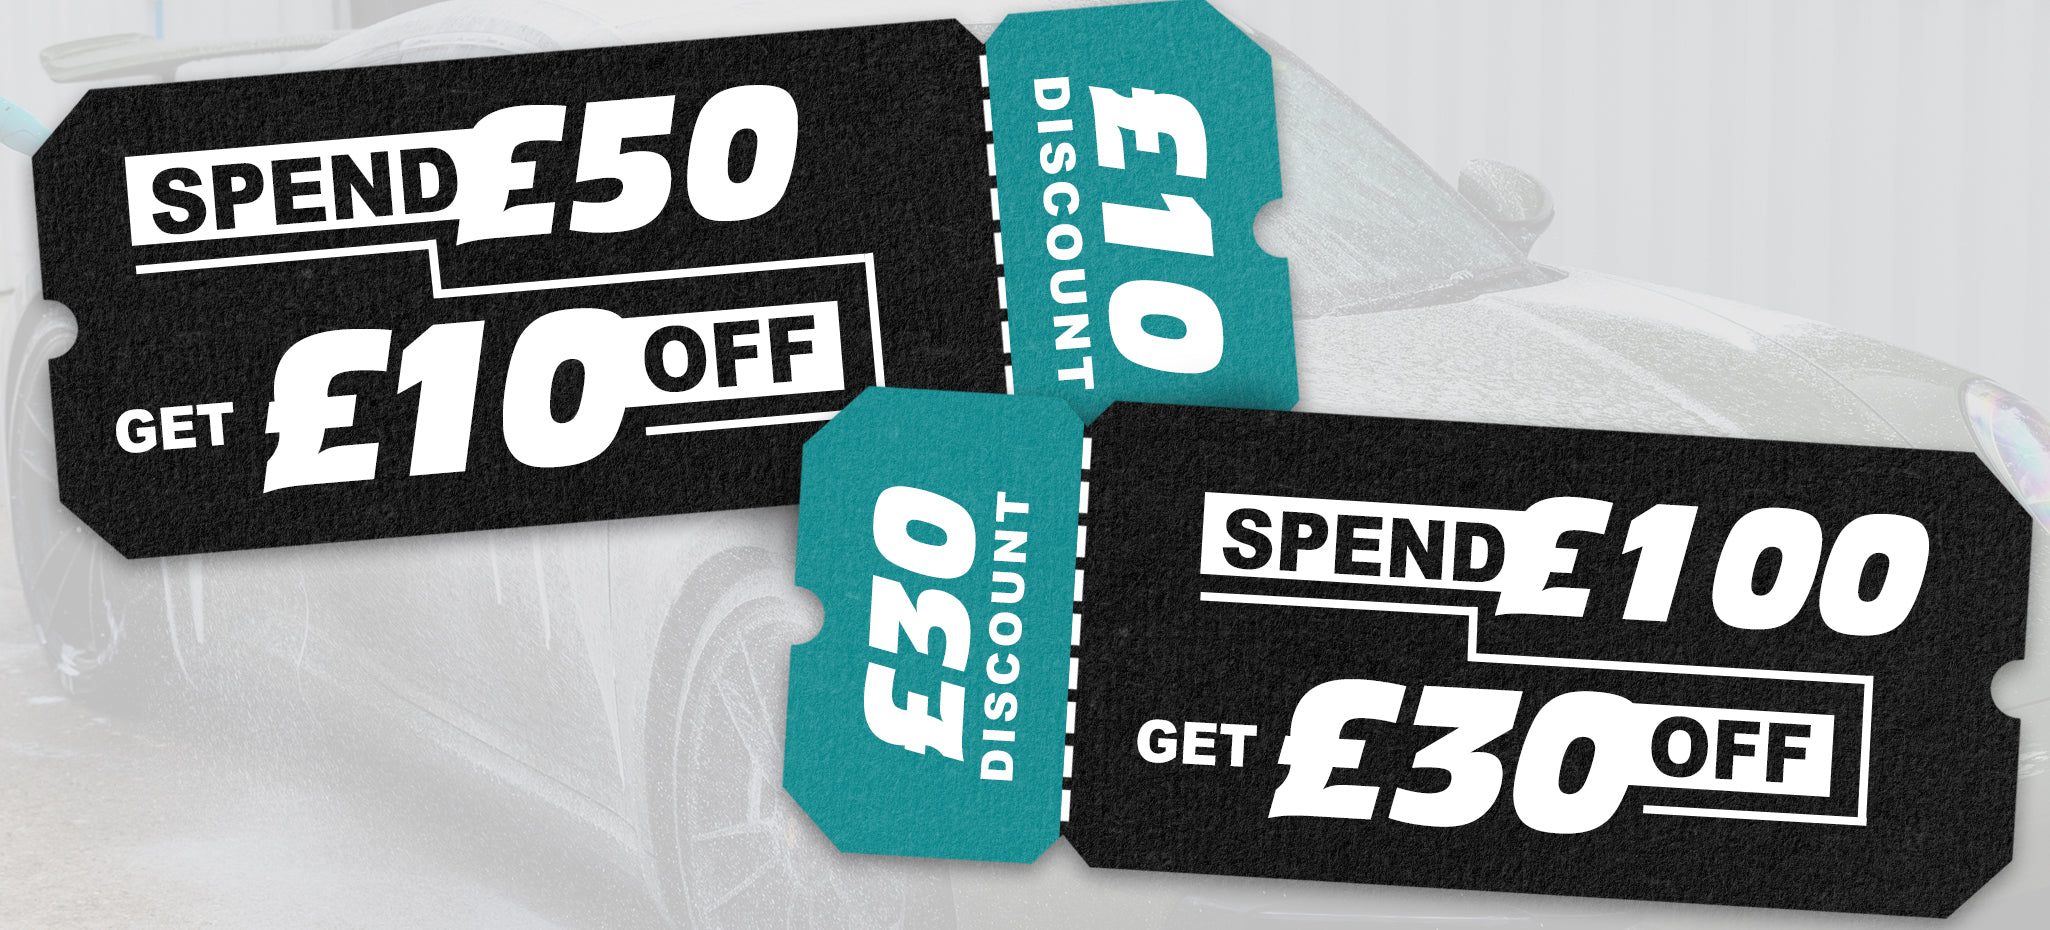 Save Up To £30 On Your Favourite Detailing Products